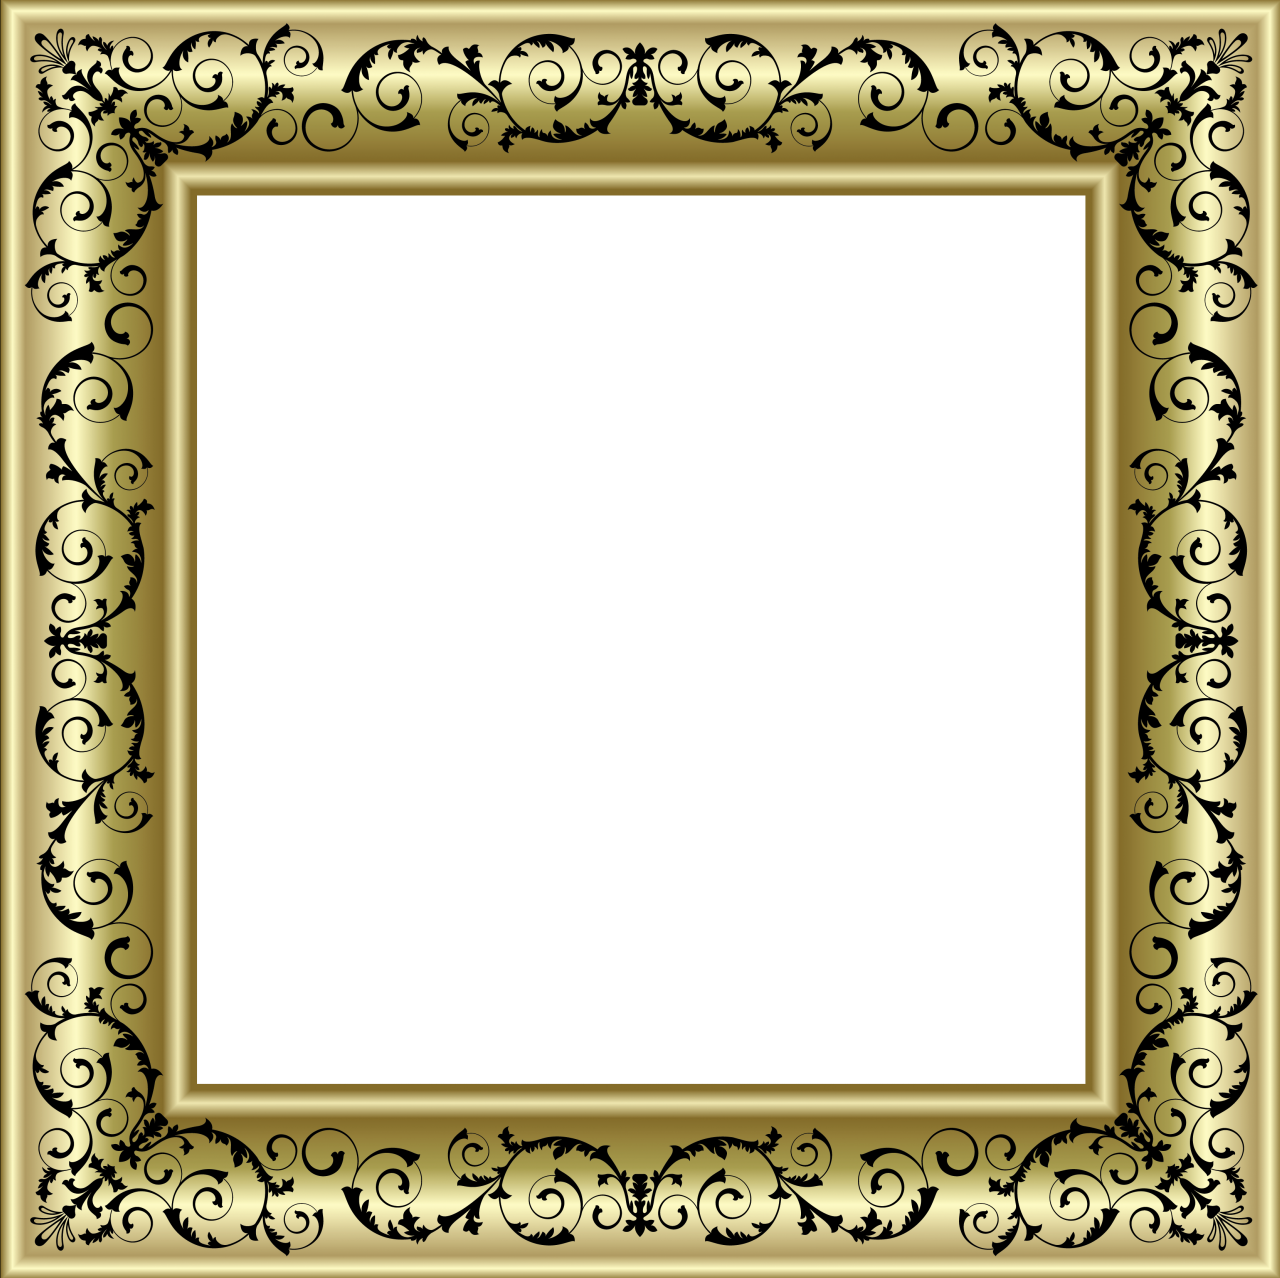 Gold Photo Frame PNG with Black Ornaments | Gallery Yopriceville - High